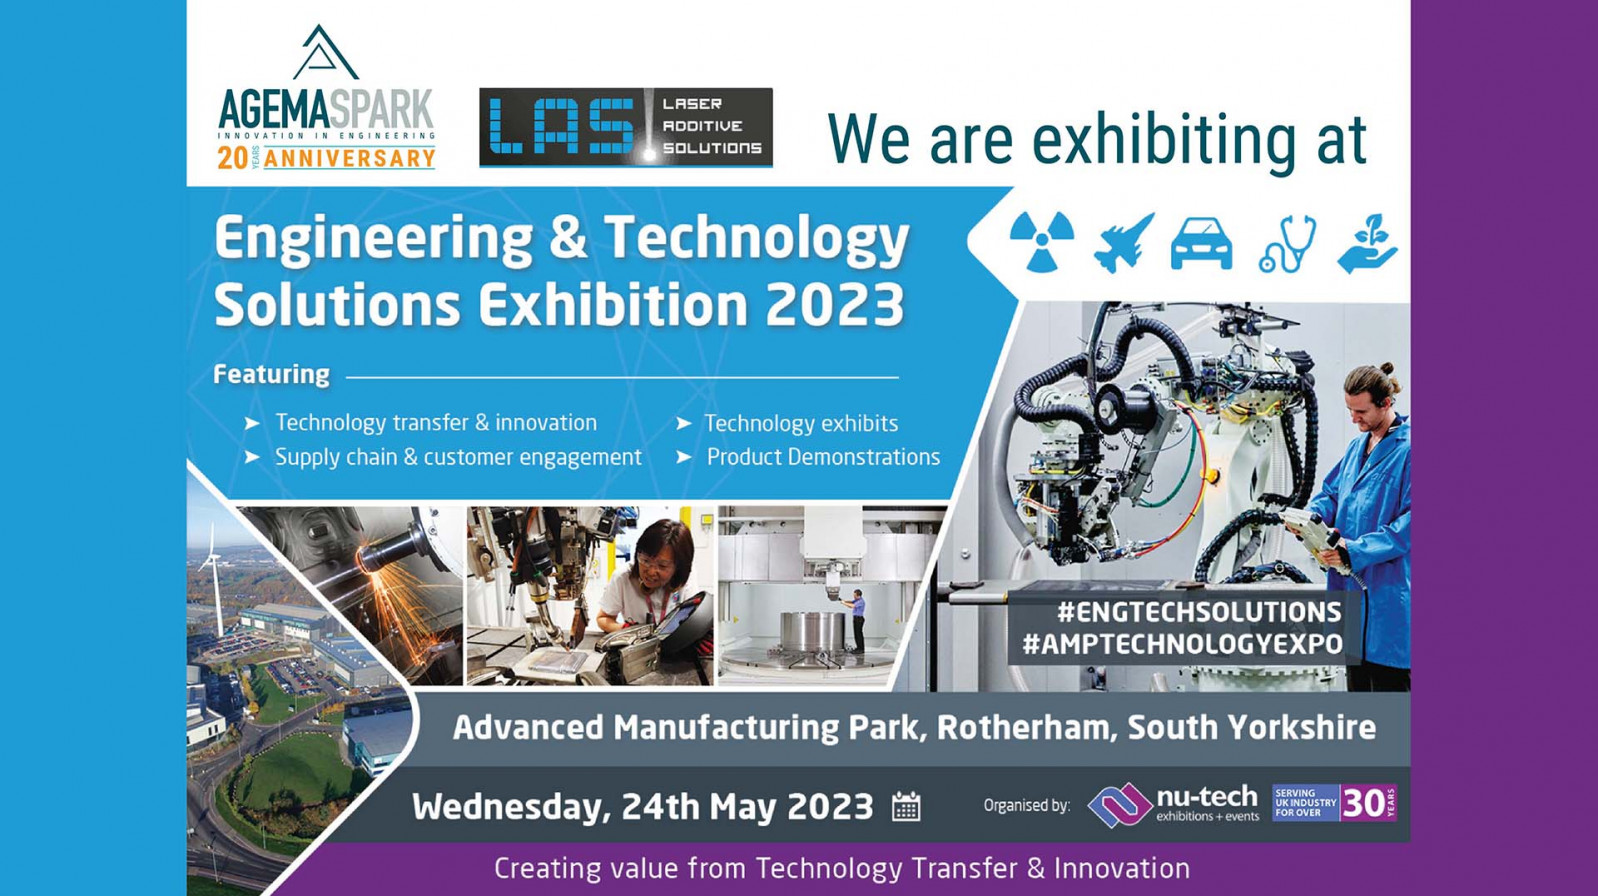 Agemaspark and Laser Additive Solutions collaborate at leading engineering exhibition